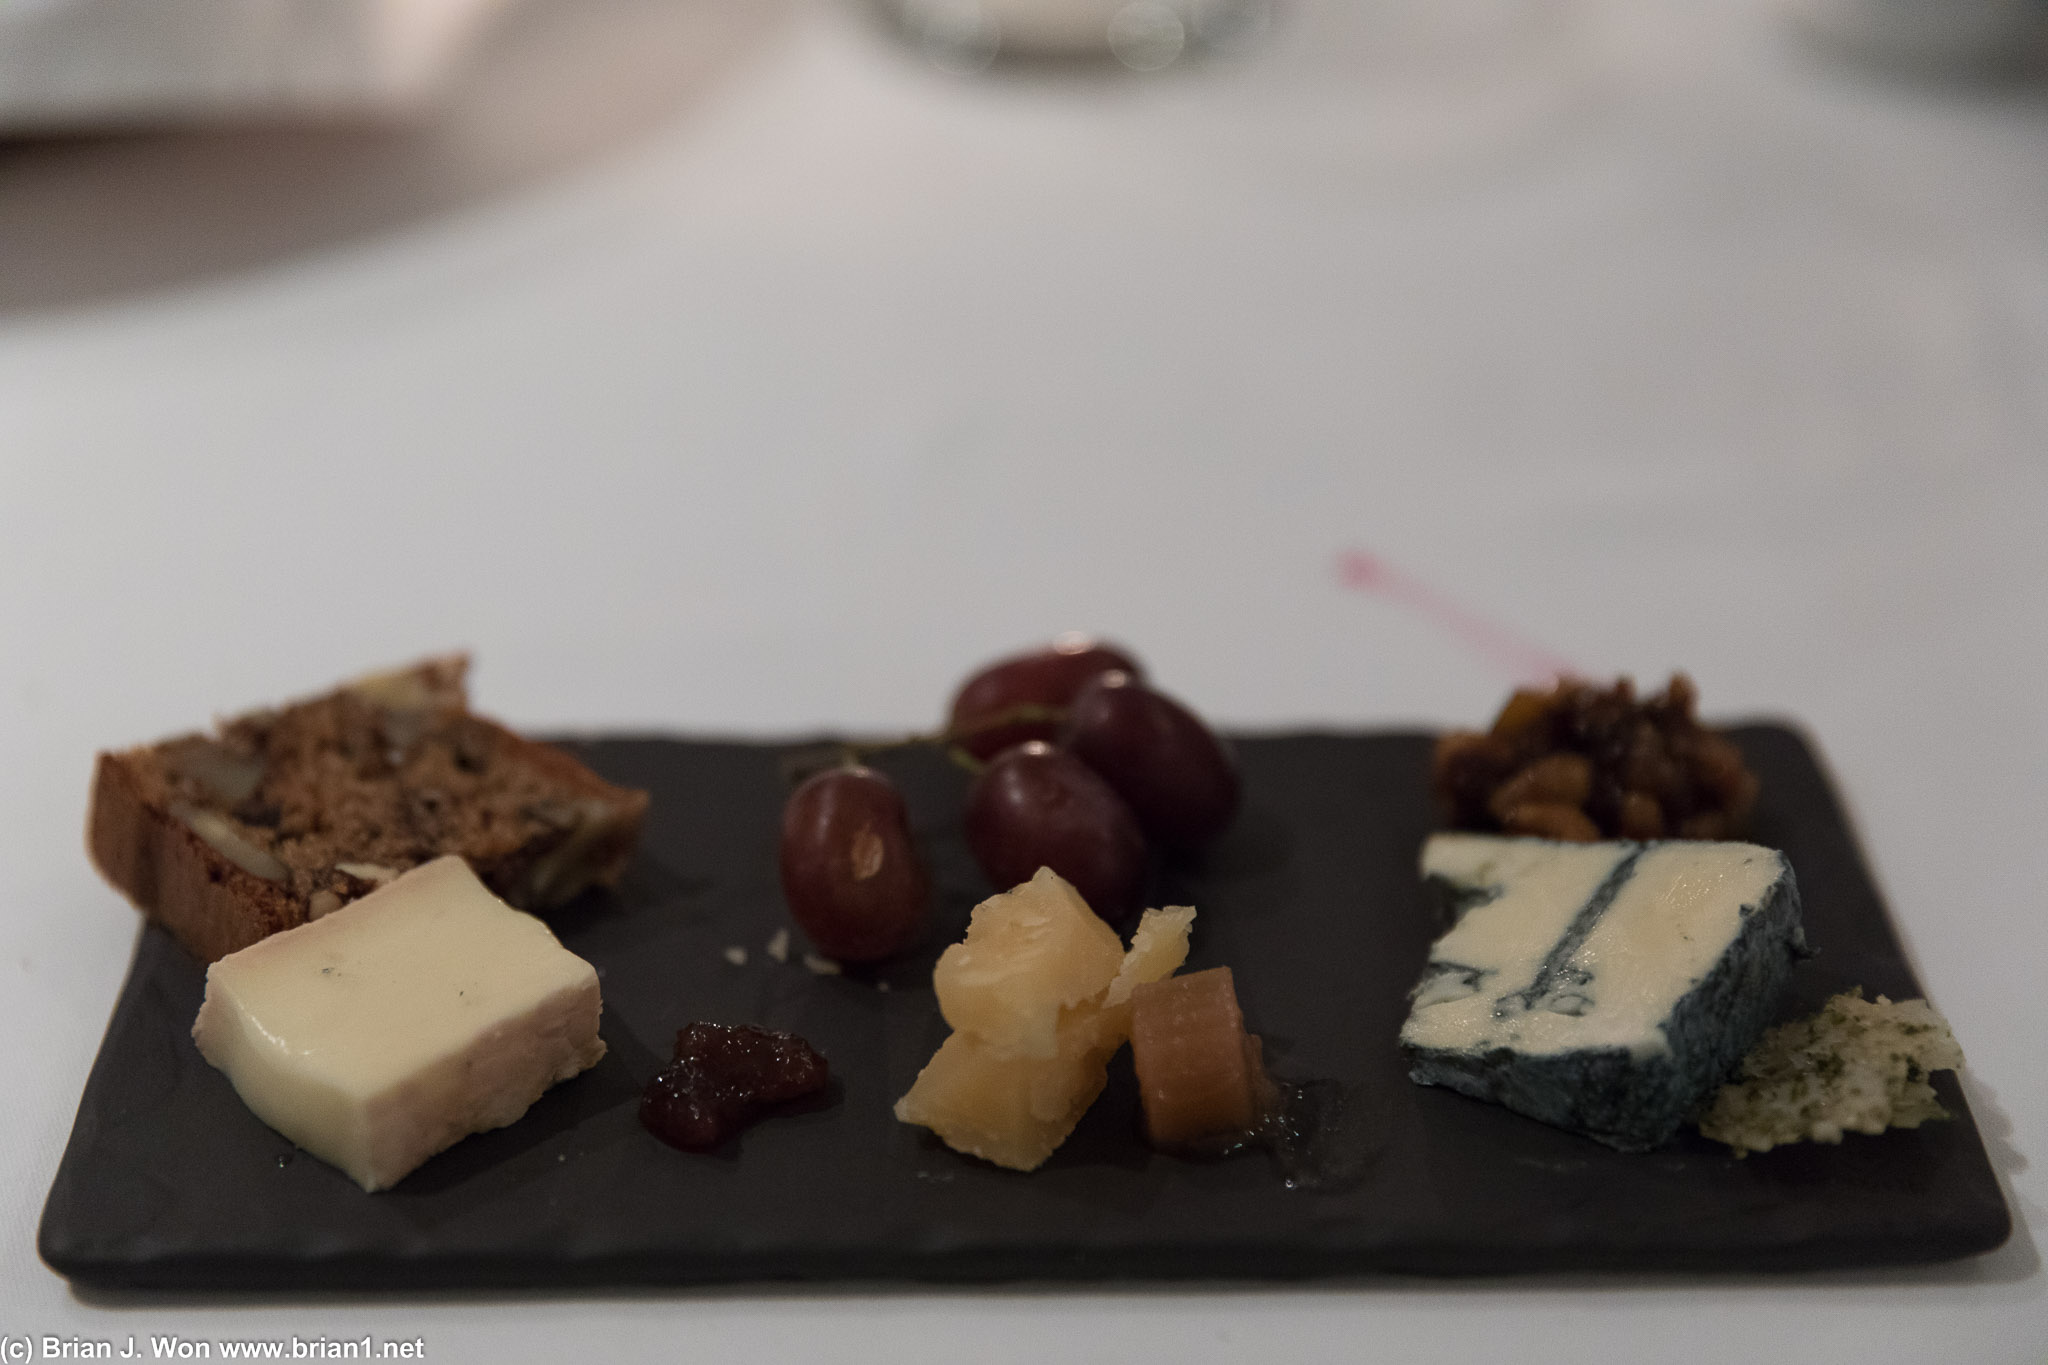 Cheese board, with grapes and fruit bread.